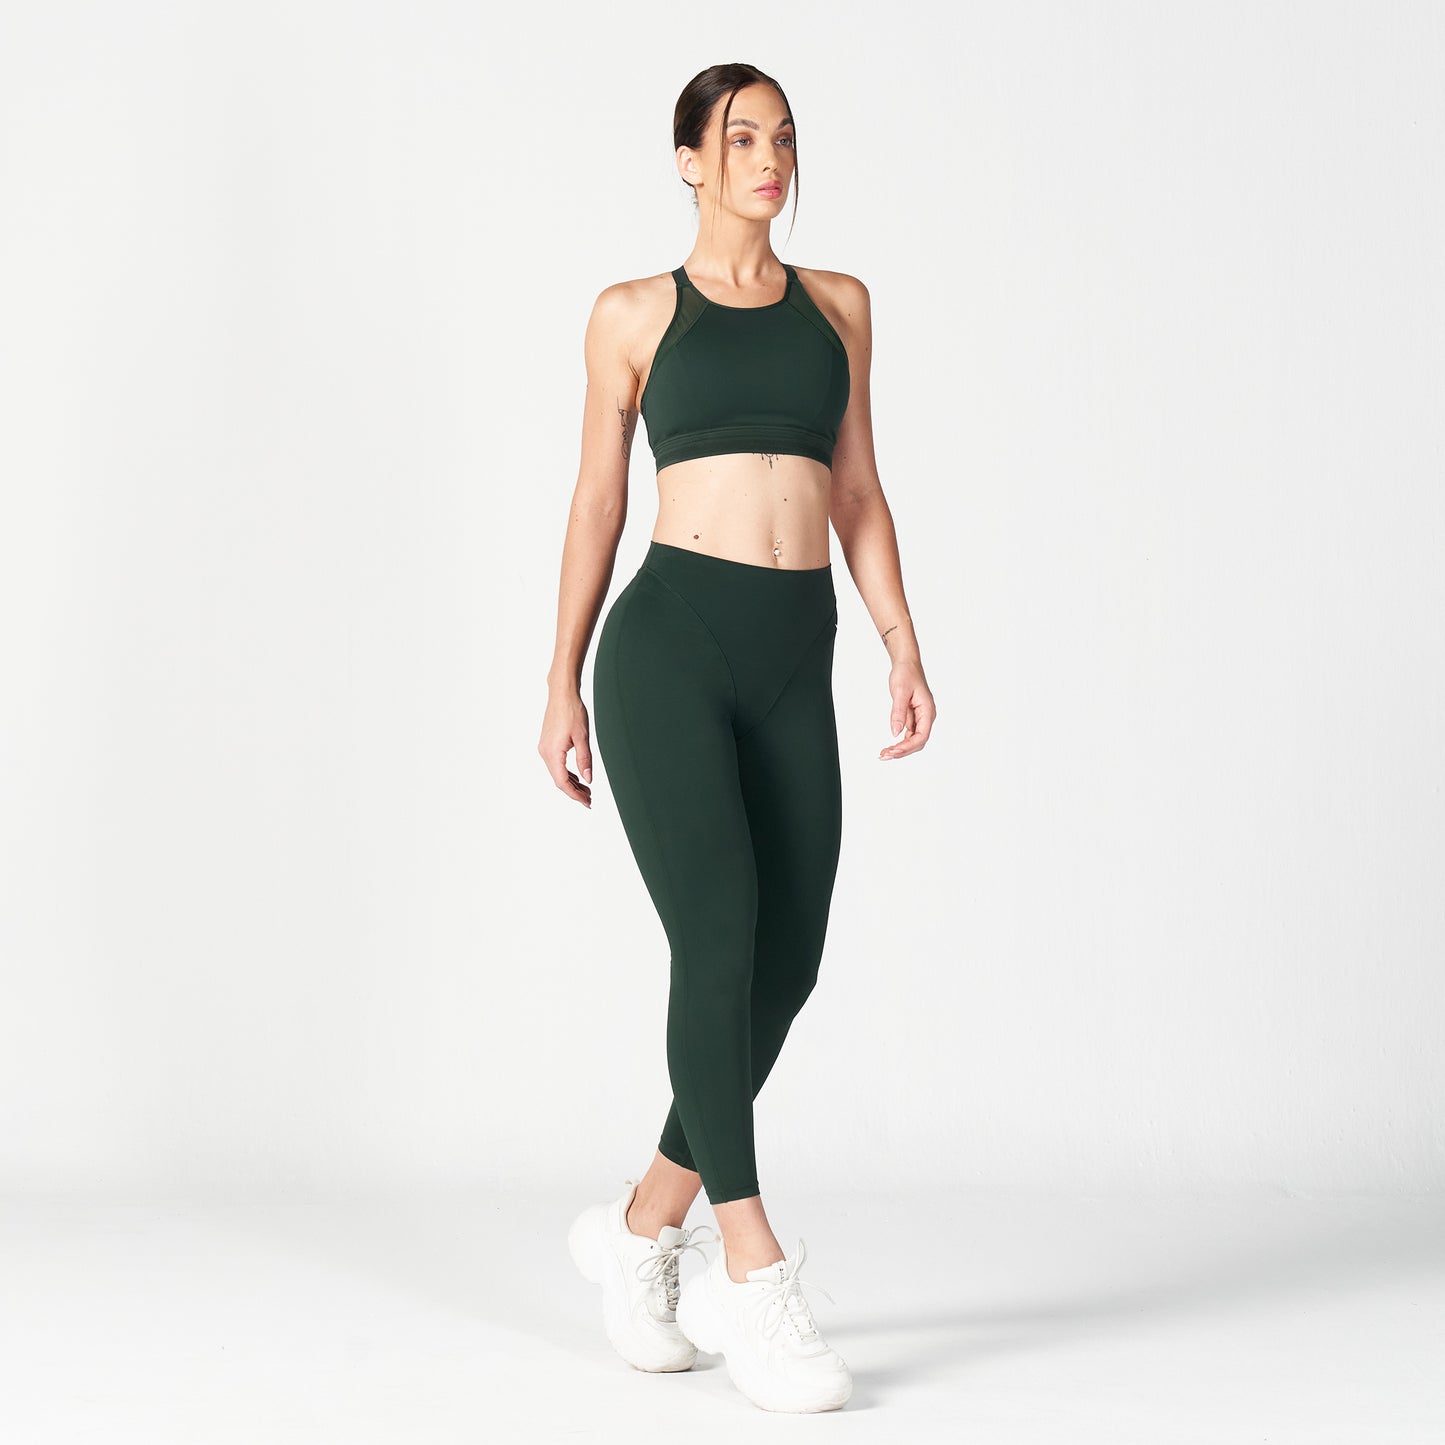 squatwolf-workout-clothes-core-v-cropped-leggings-green-gym-leggings-for-women